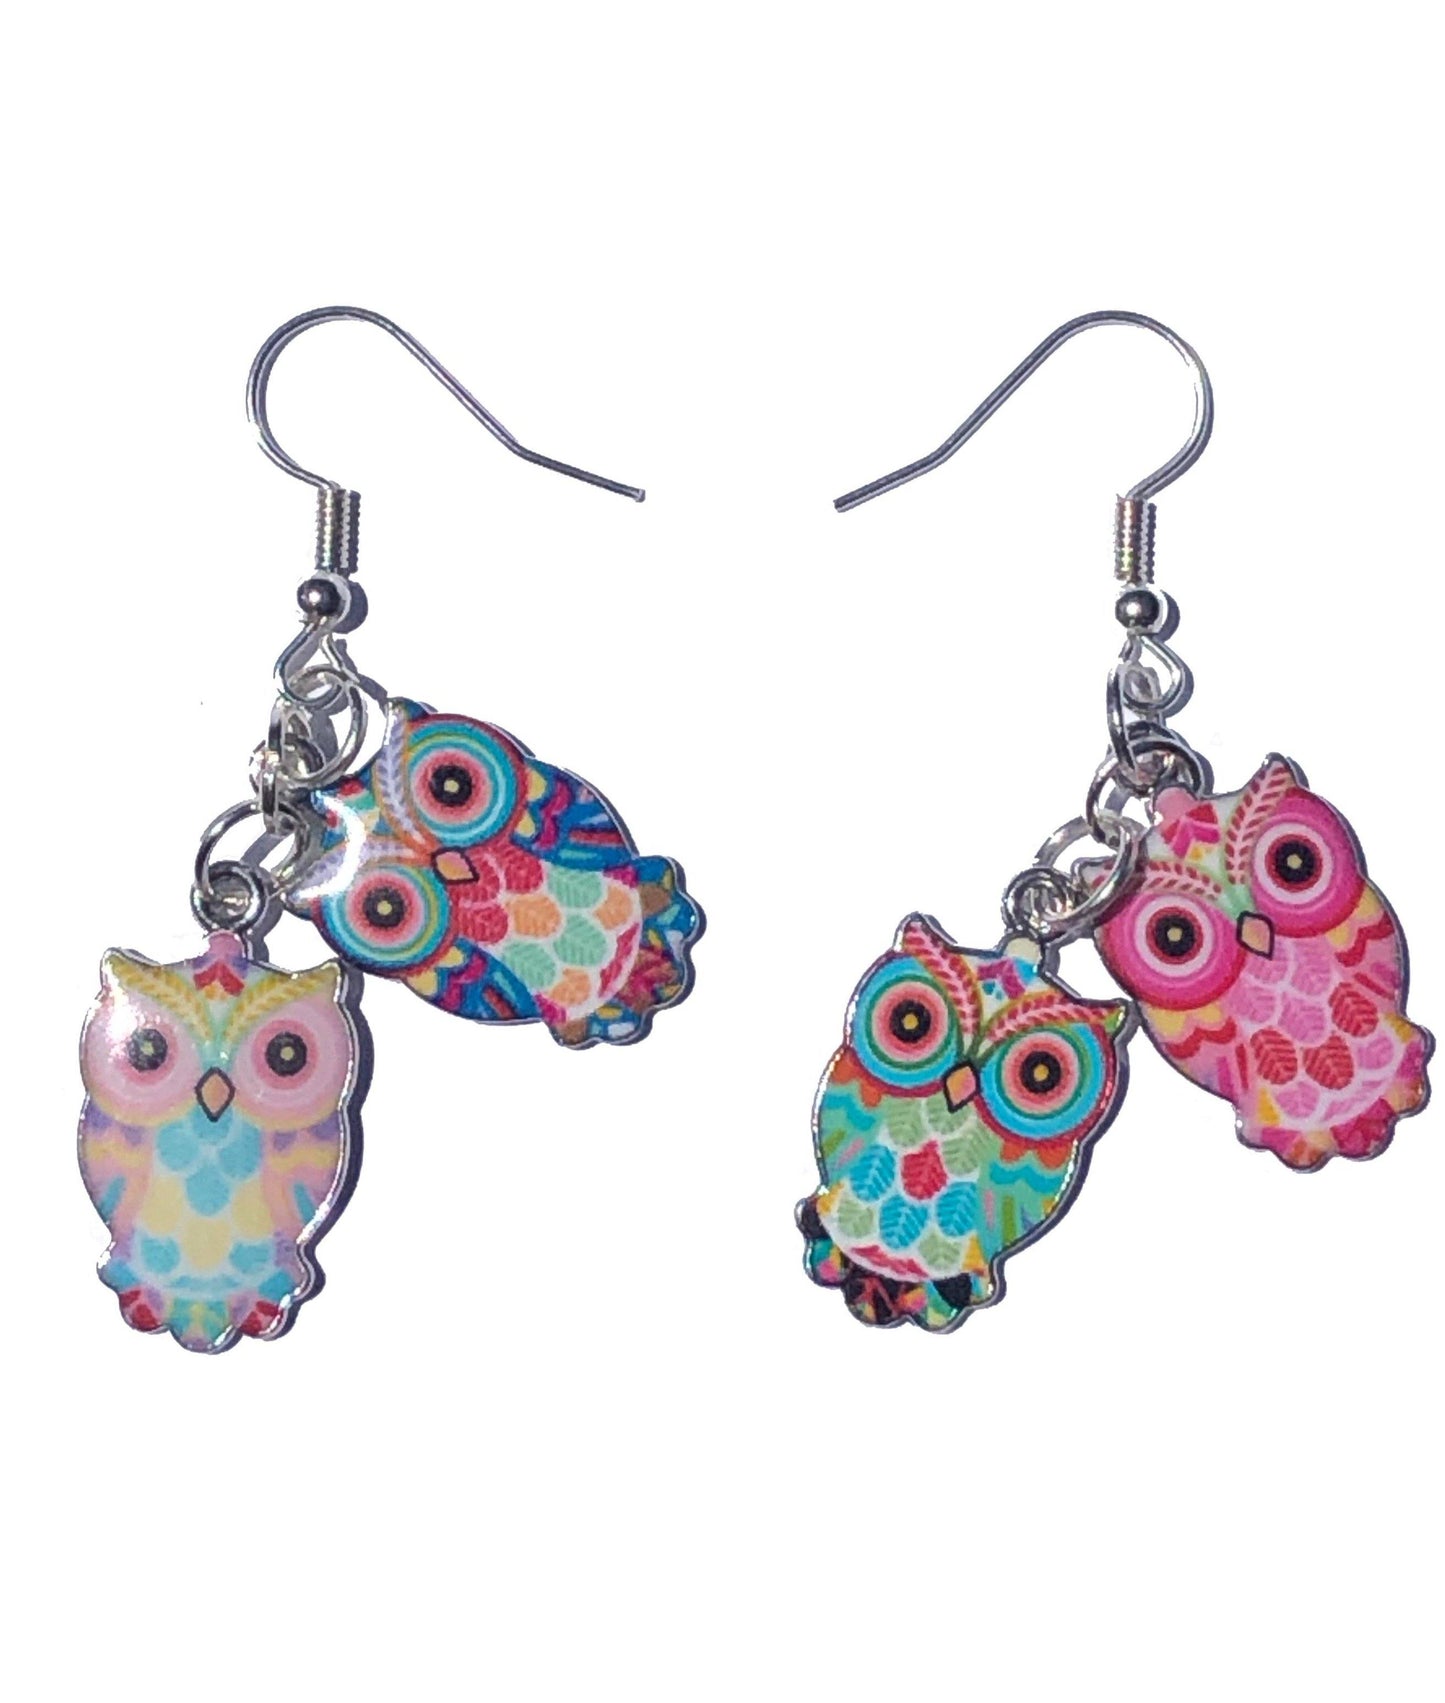 handcrafted silver chain link earrings with colorful owl charms .